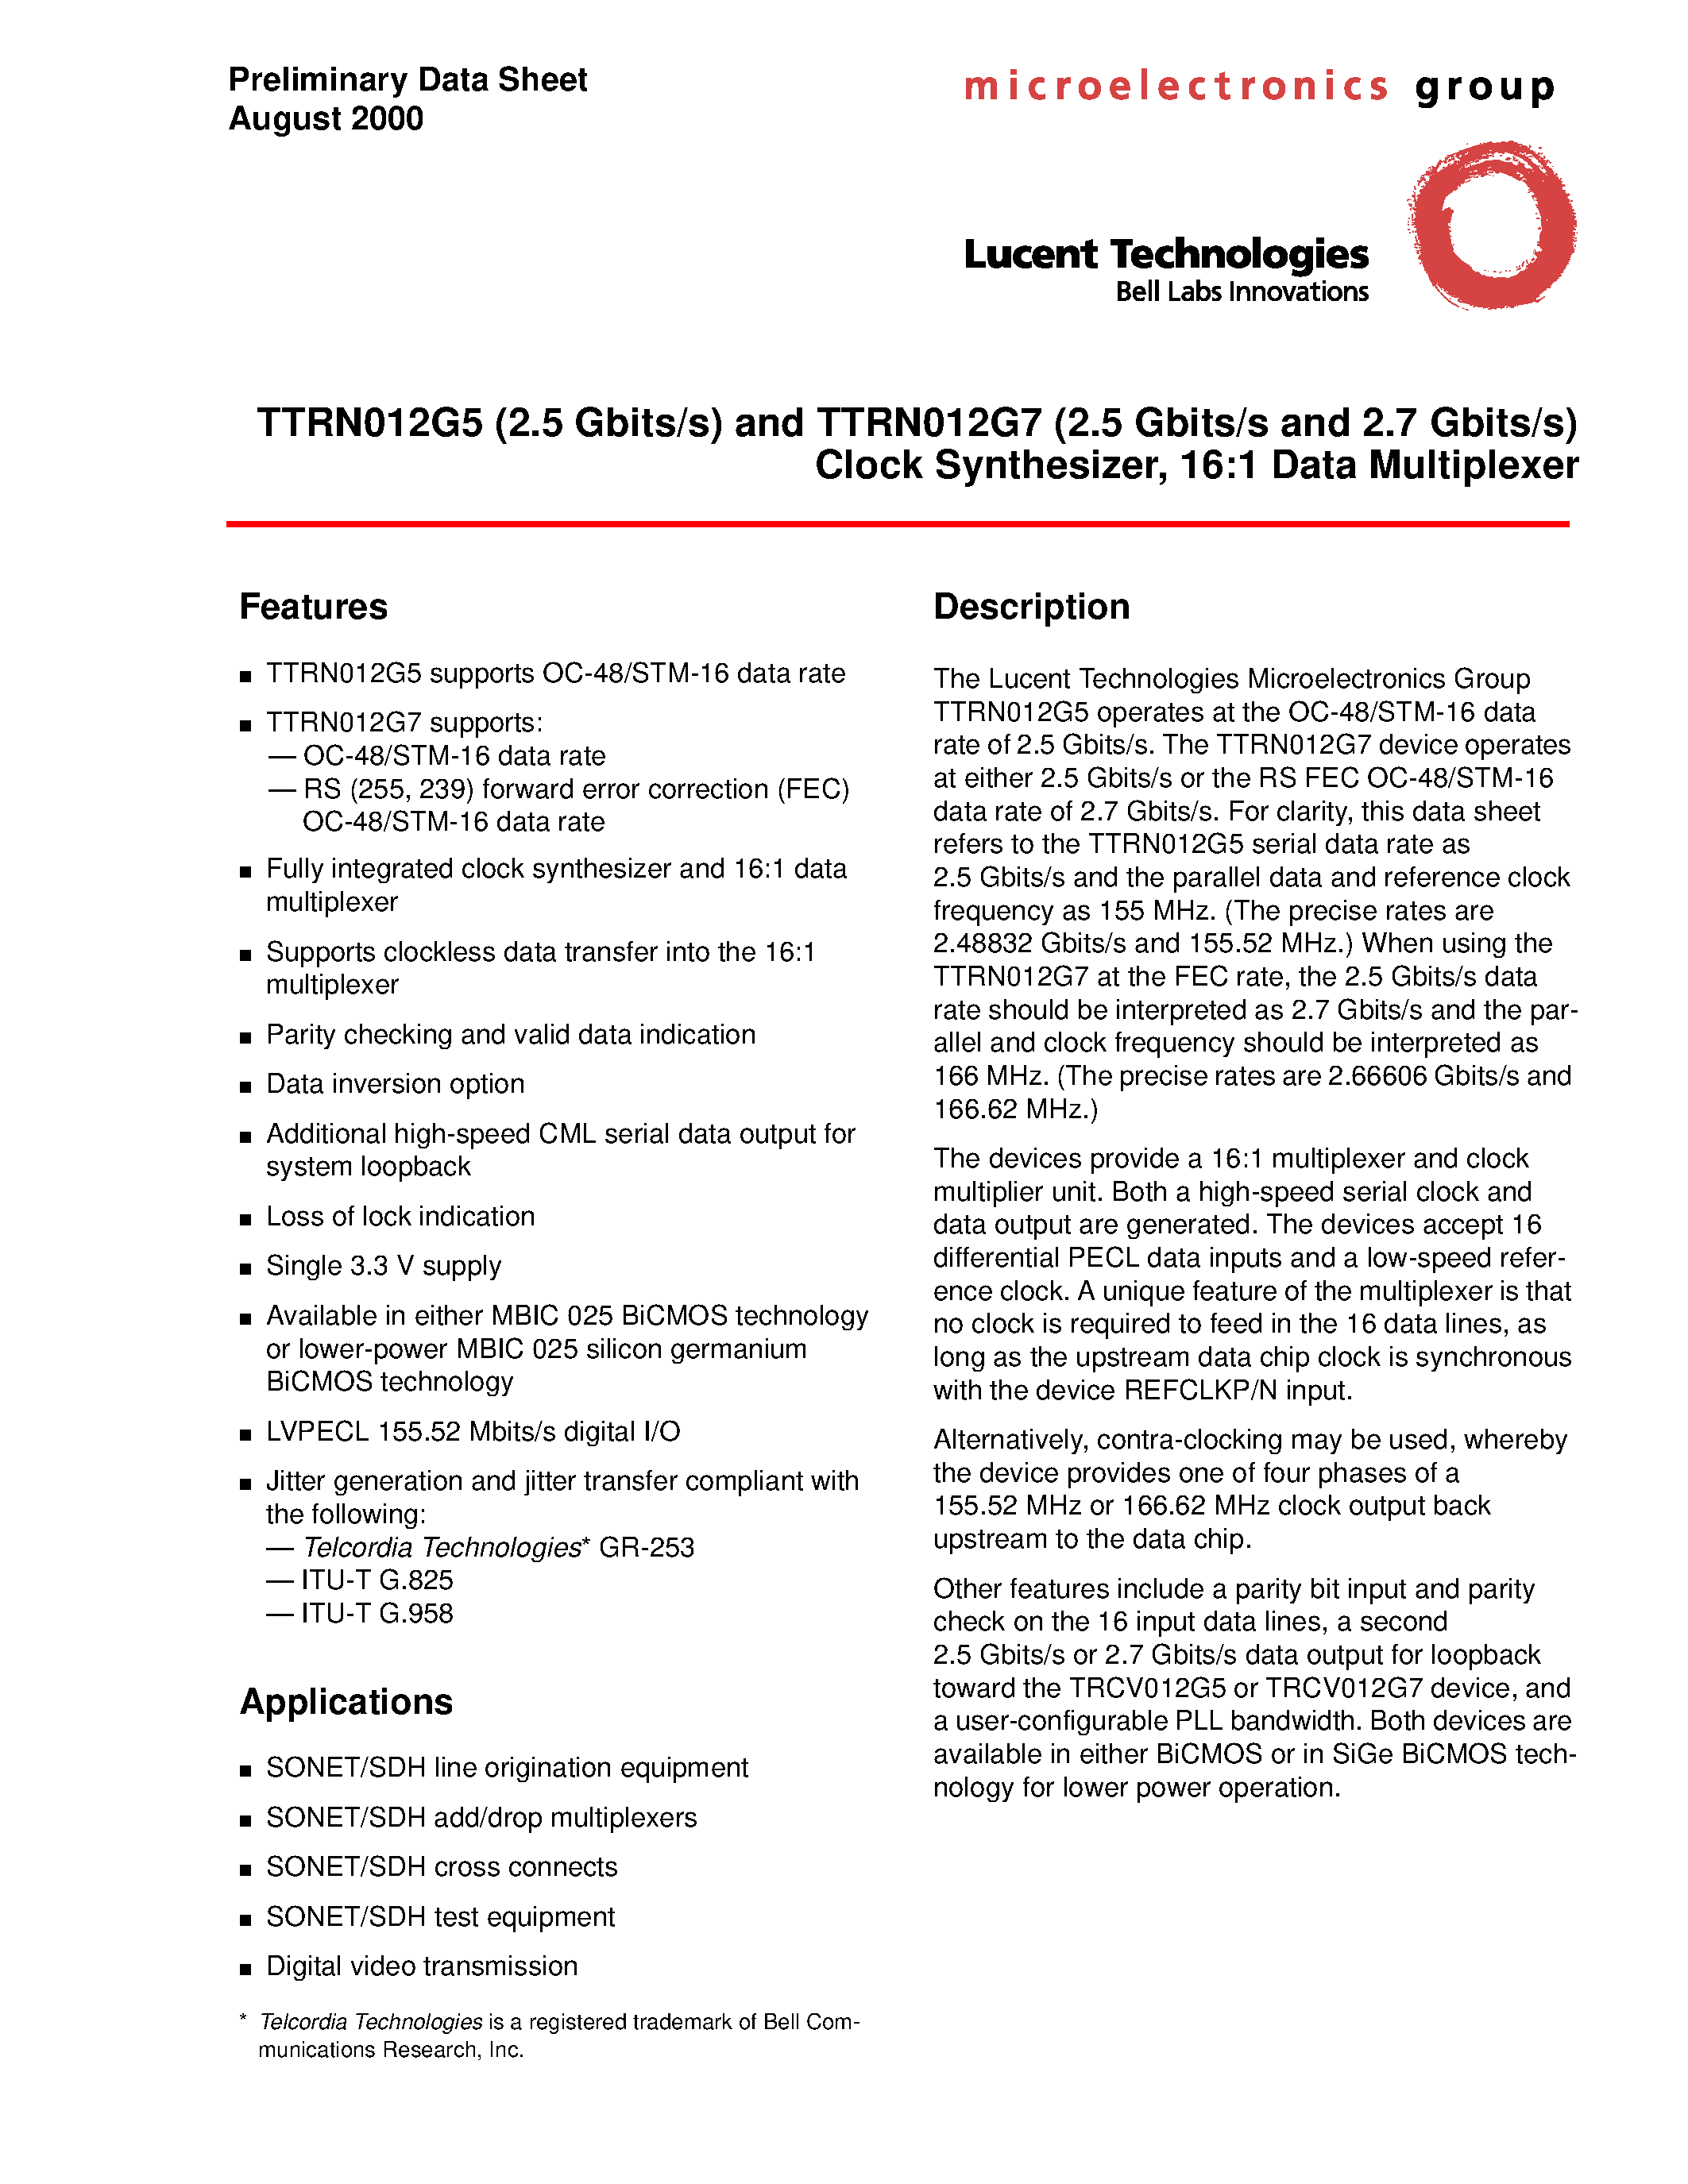 Datasheet TTRN012G7 - TTRN012G5 (2.5 Gbits/s) and TTRN012G7 (2.5 Gbits/s and 2.7 Gbits/s) Clock Synthesizer/ 16:1 Data Multiplexer page 1